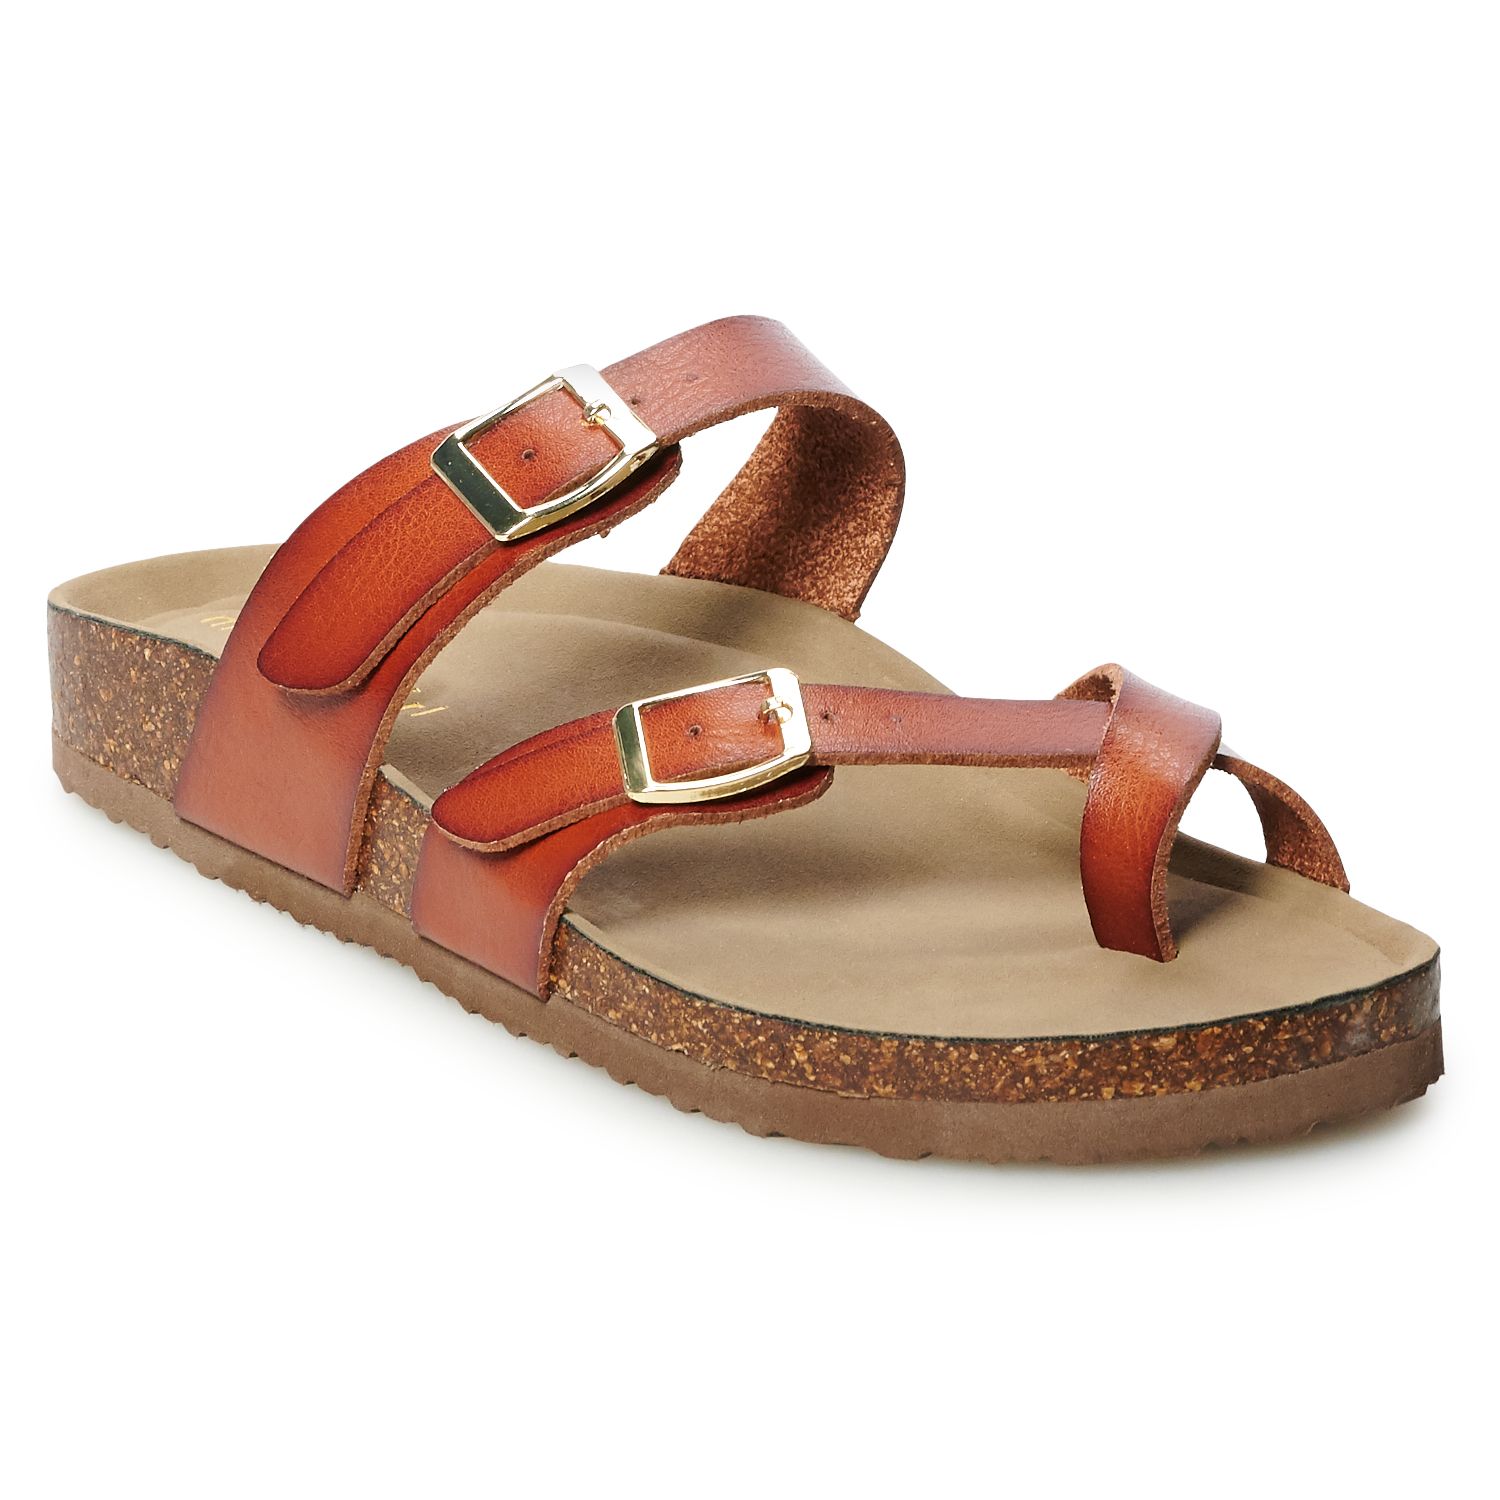 Womens Sandals Clearance | Kohl's